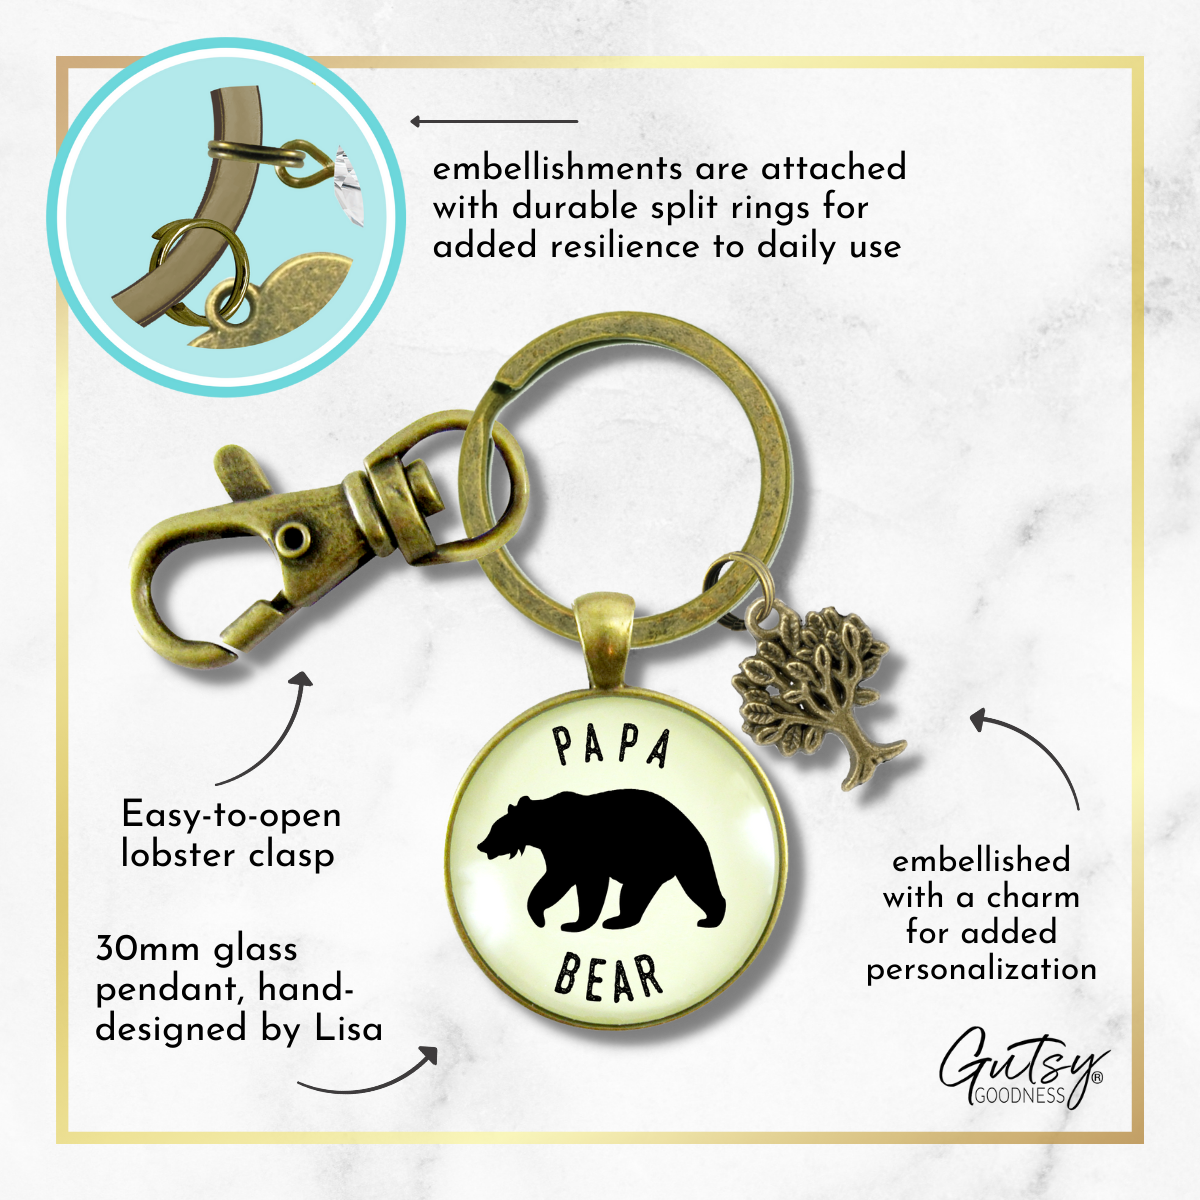 Papa Bear Keychain Fathers Rustic Key Ring Gift Expectant Dad Father Grandpa - Gutsy Goodness Handmade Jewelry;Papa Bear Keychain Fathers Rustic Key Ring Gift Expectant Dad Father Grandpa - Gutsy Goodness Handmade Jewelry Gifts